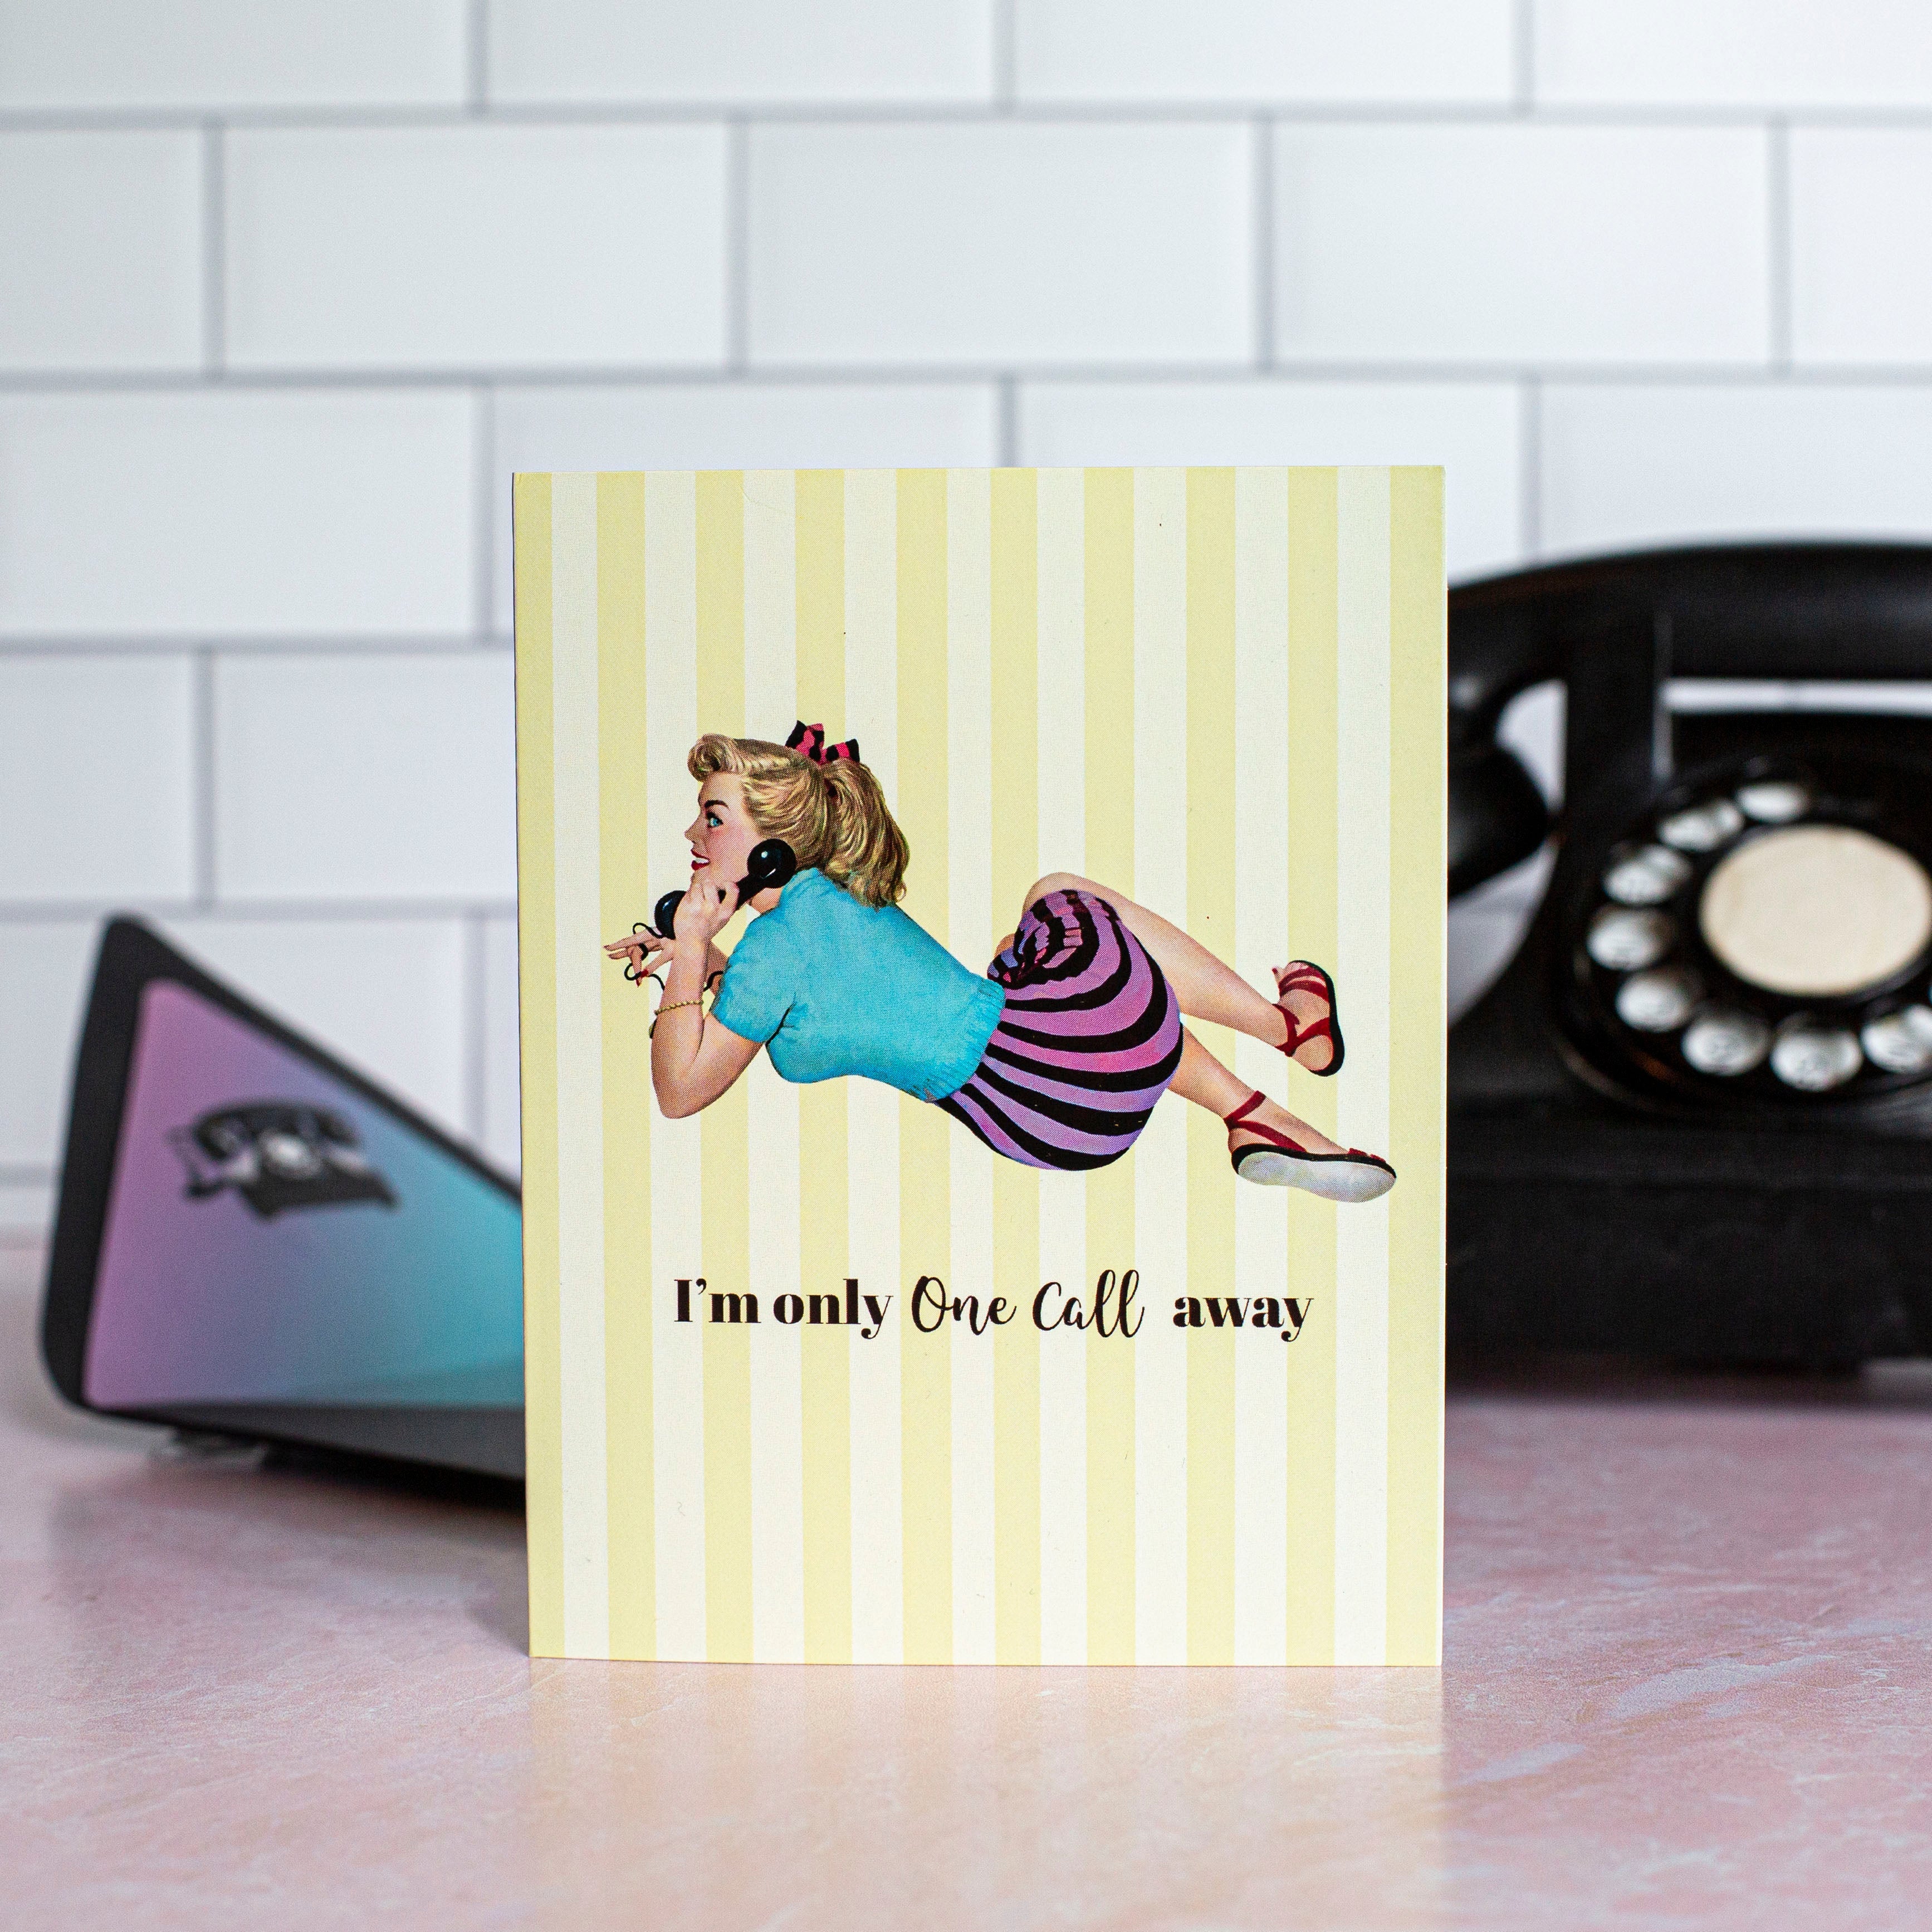 Im only one call away think of you vintage pinup greeting card